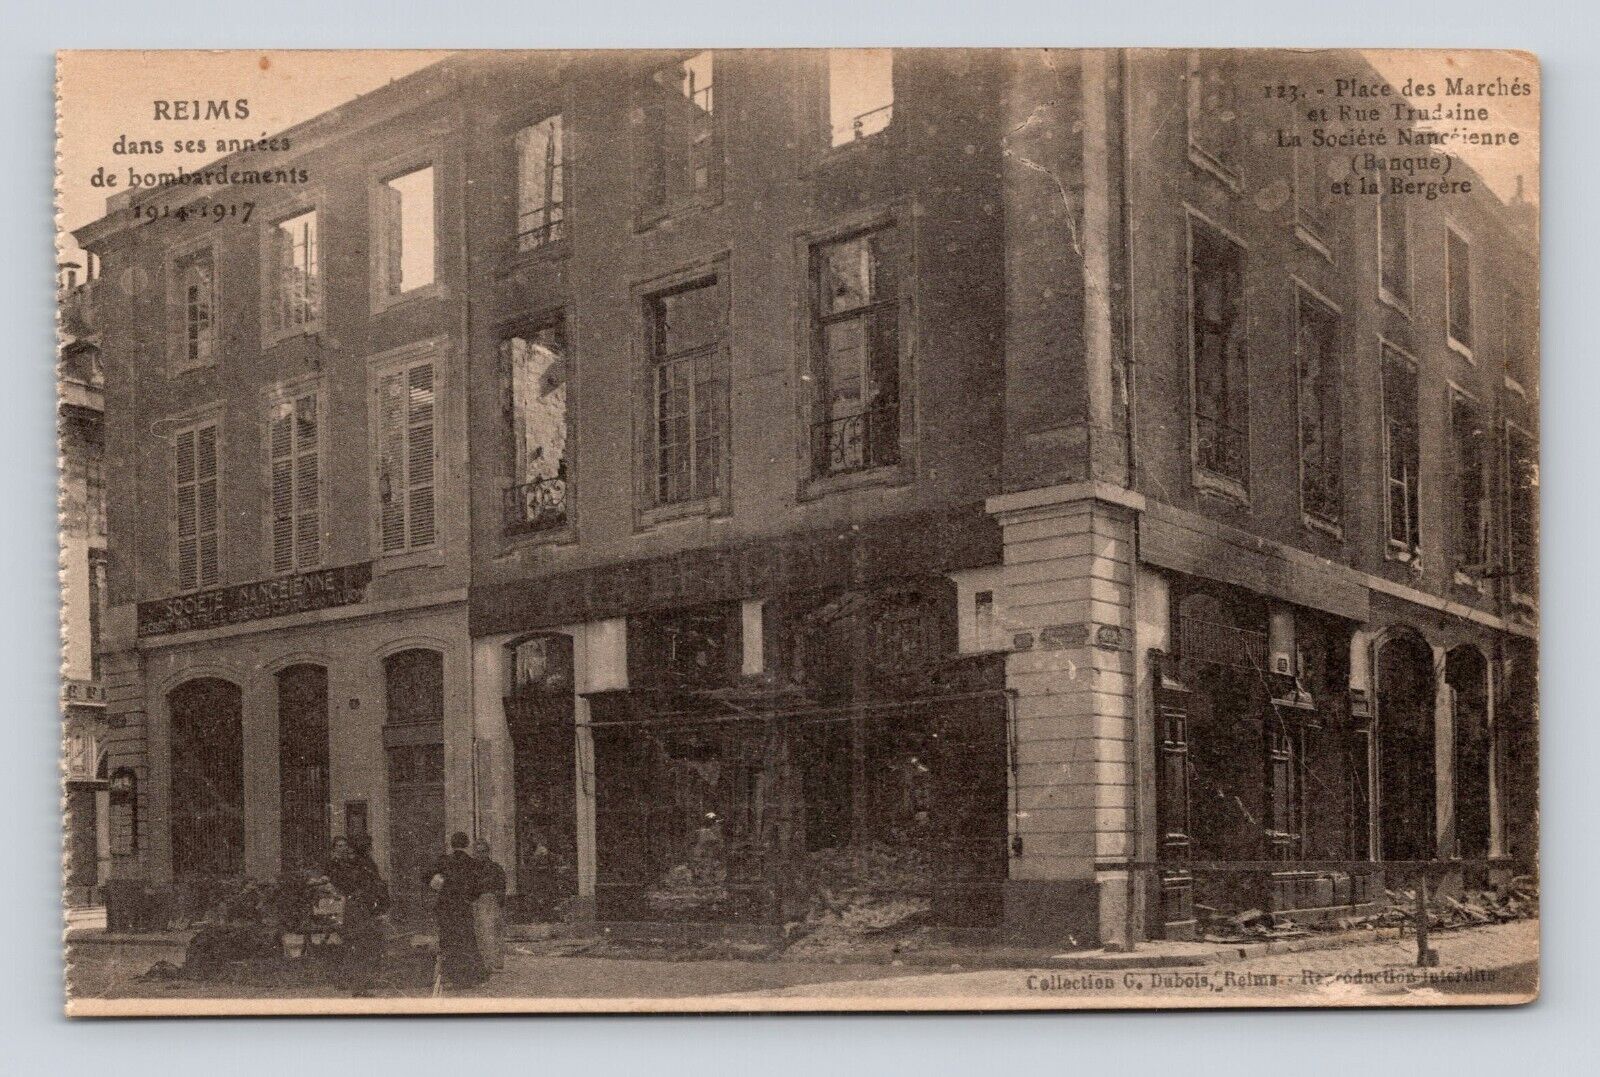 Antique Old Postcard REIMS BOMBINGS 1914-17 RUINS BANK CREDIT UNION FRANCE WW1